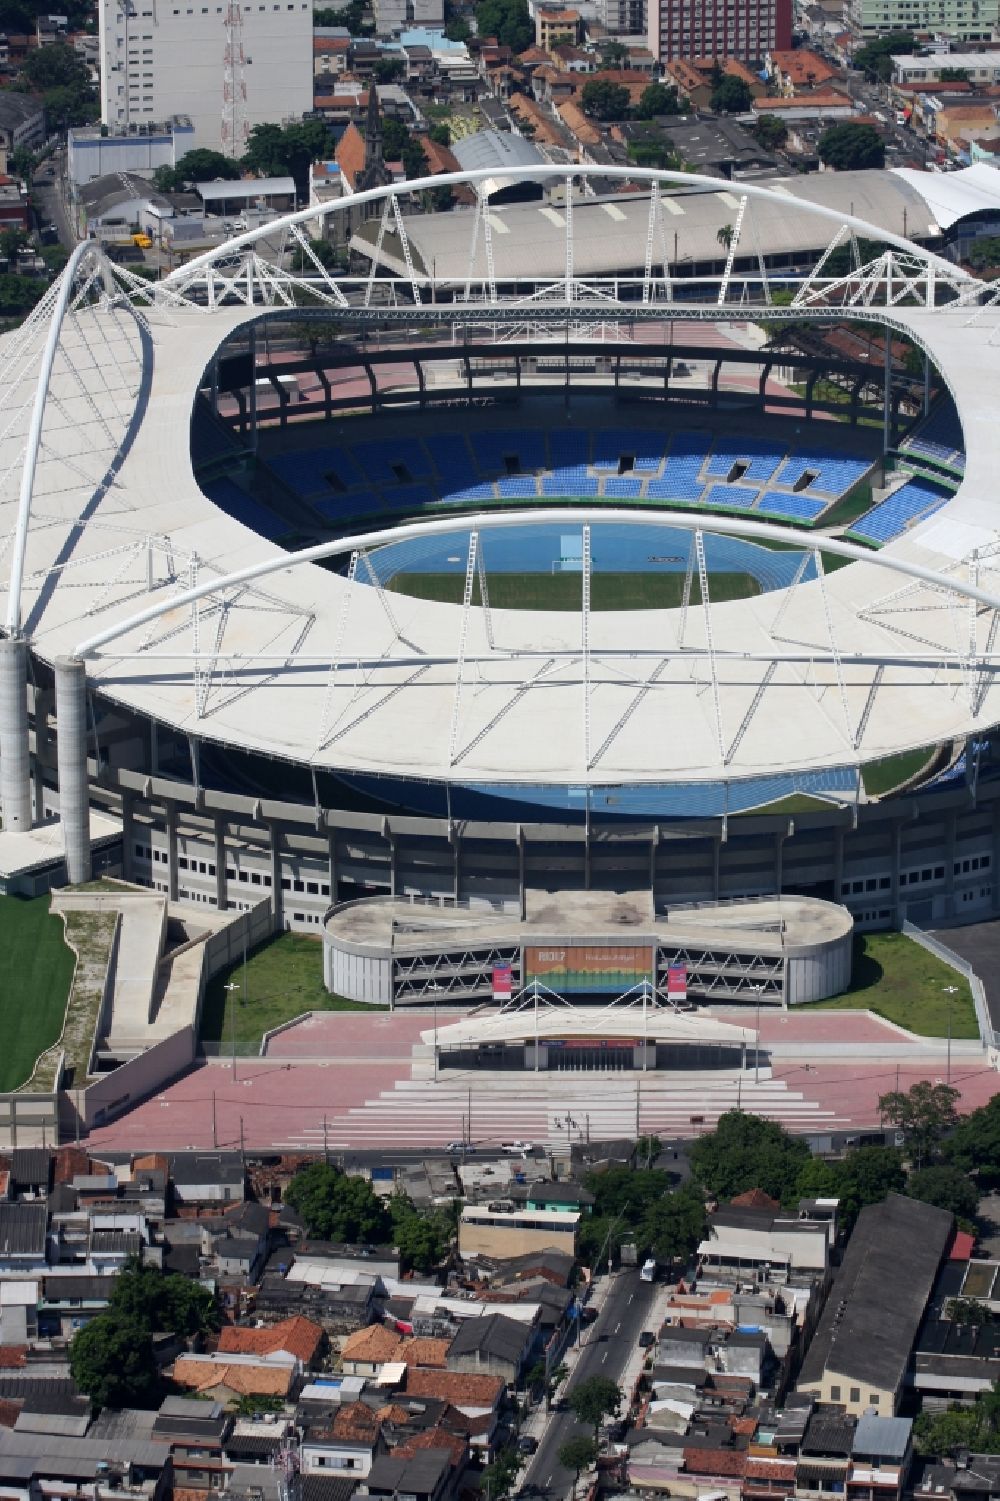 Rio de Janeiro from the bird's eye view: Sport Venue of the Estadio Olimpico Joao Havelange - Nilton Santos Stadium before the Summer Games of the Games of the XXII. Olympics. The arena is home to the football club Botafogo in Rio de Janeiro in Brazil